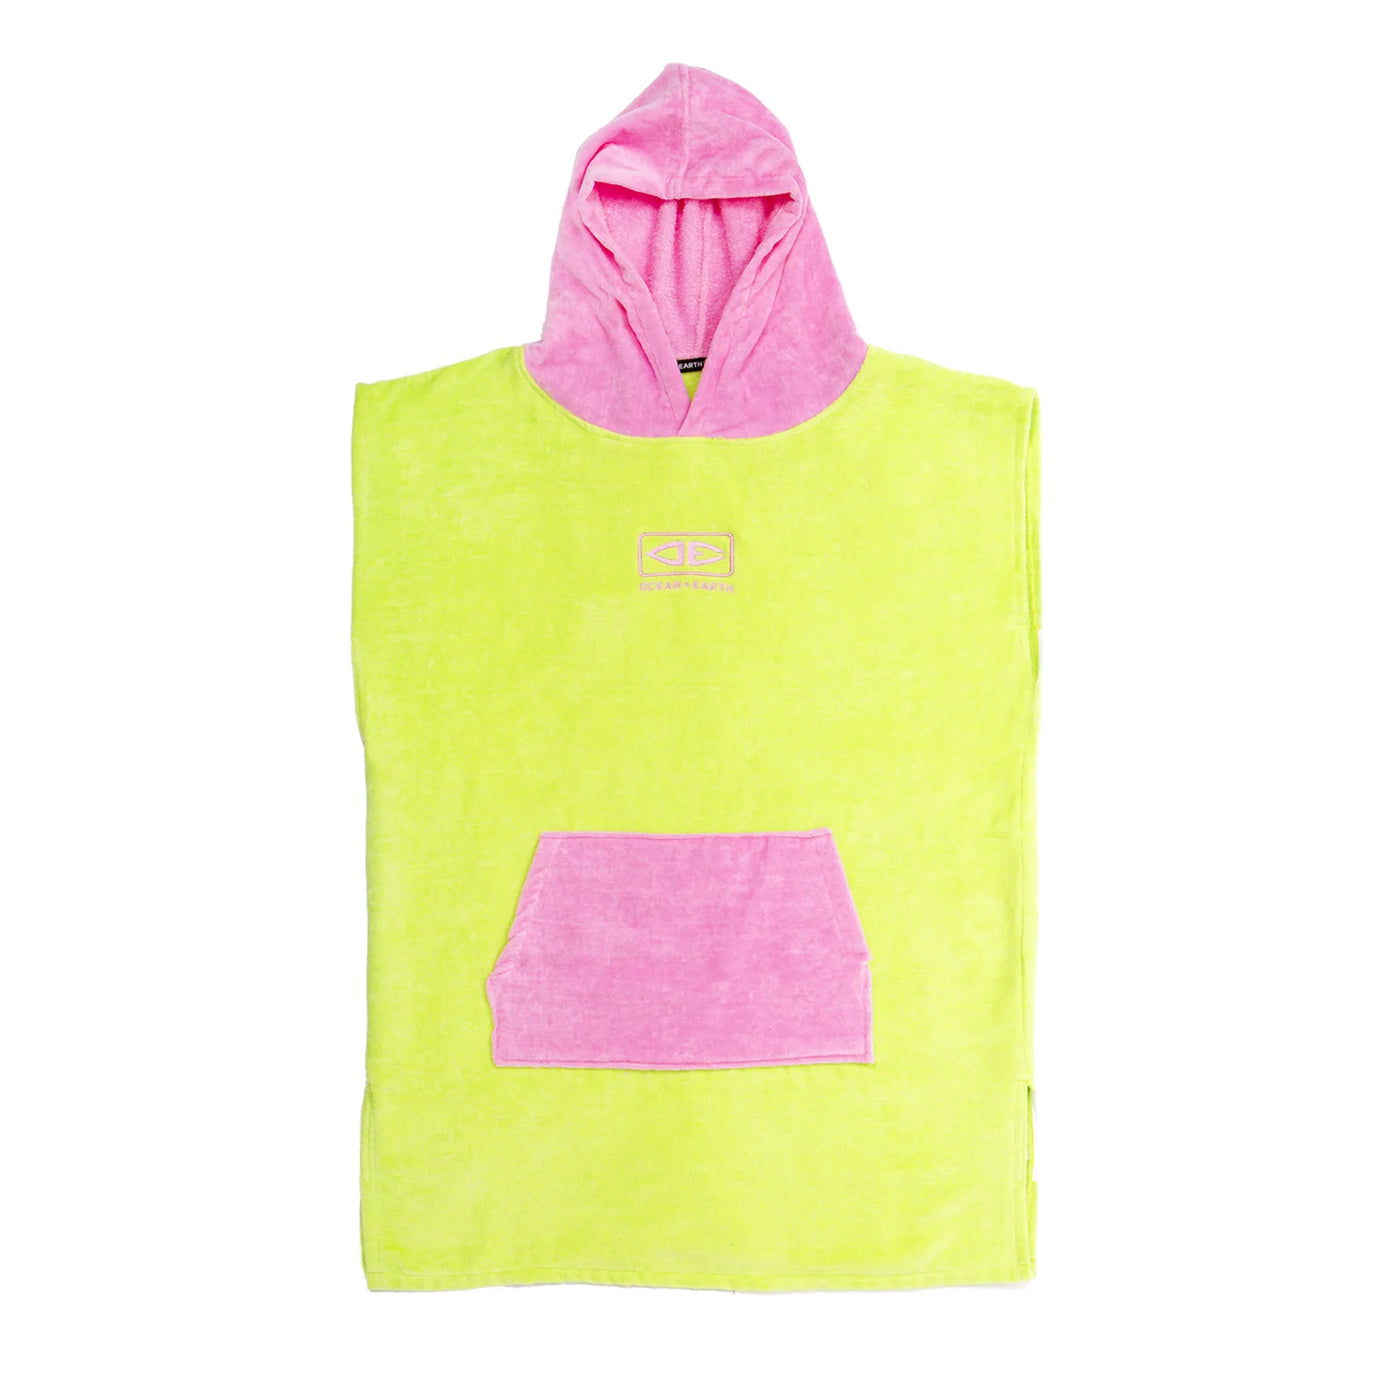 TODDLER HOODED PONCHO